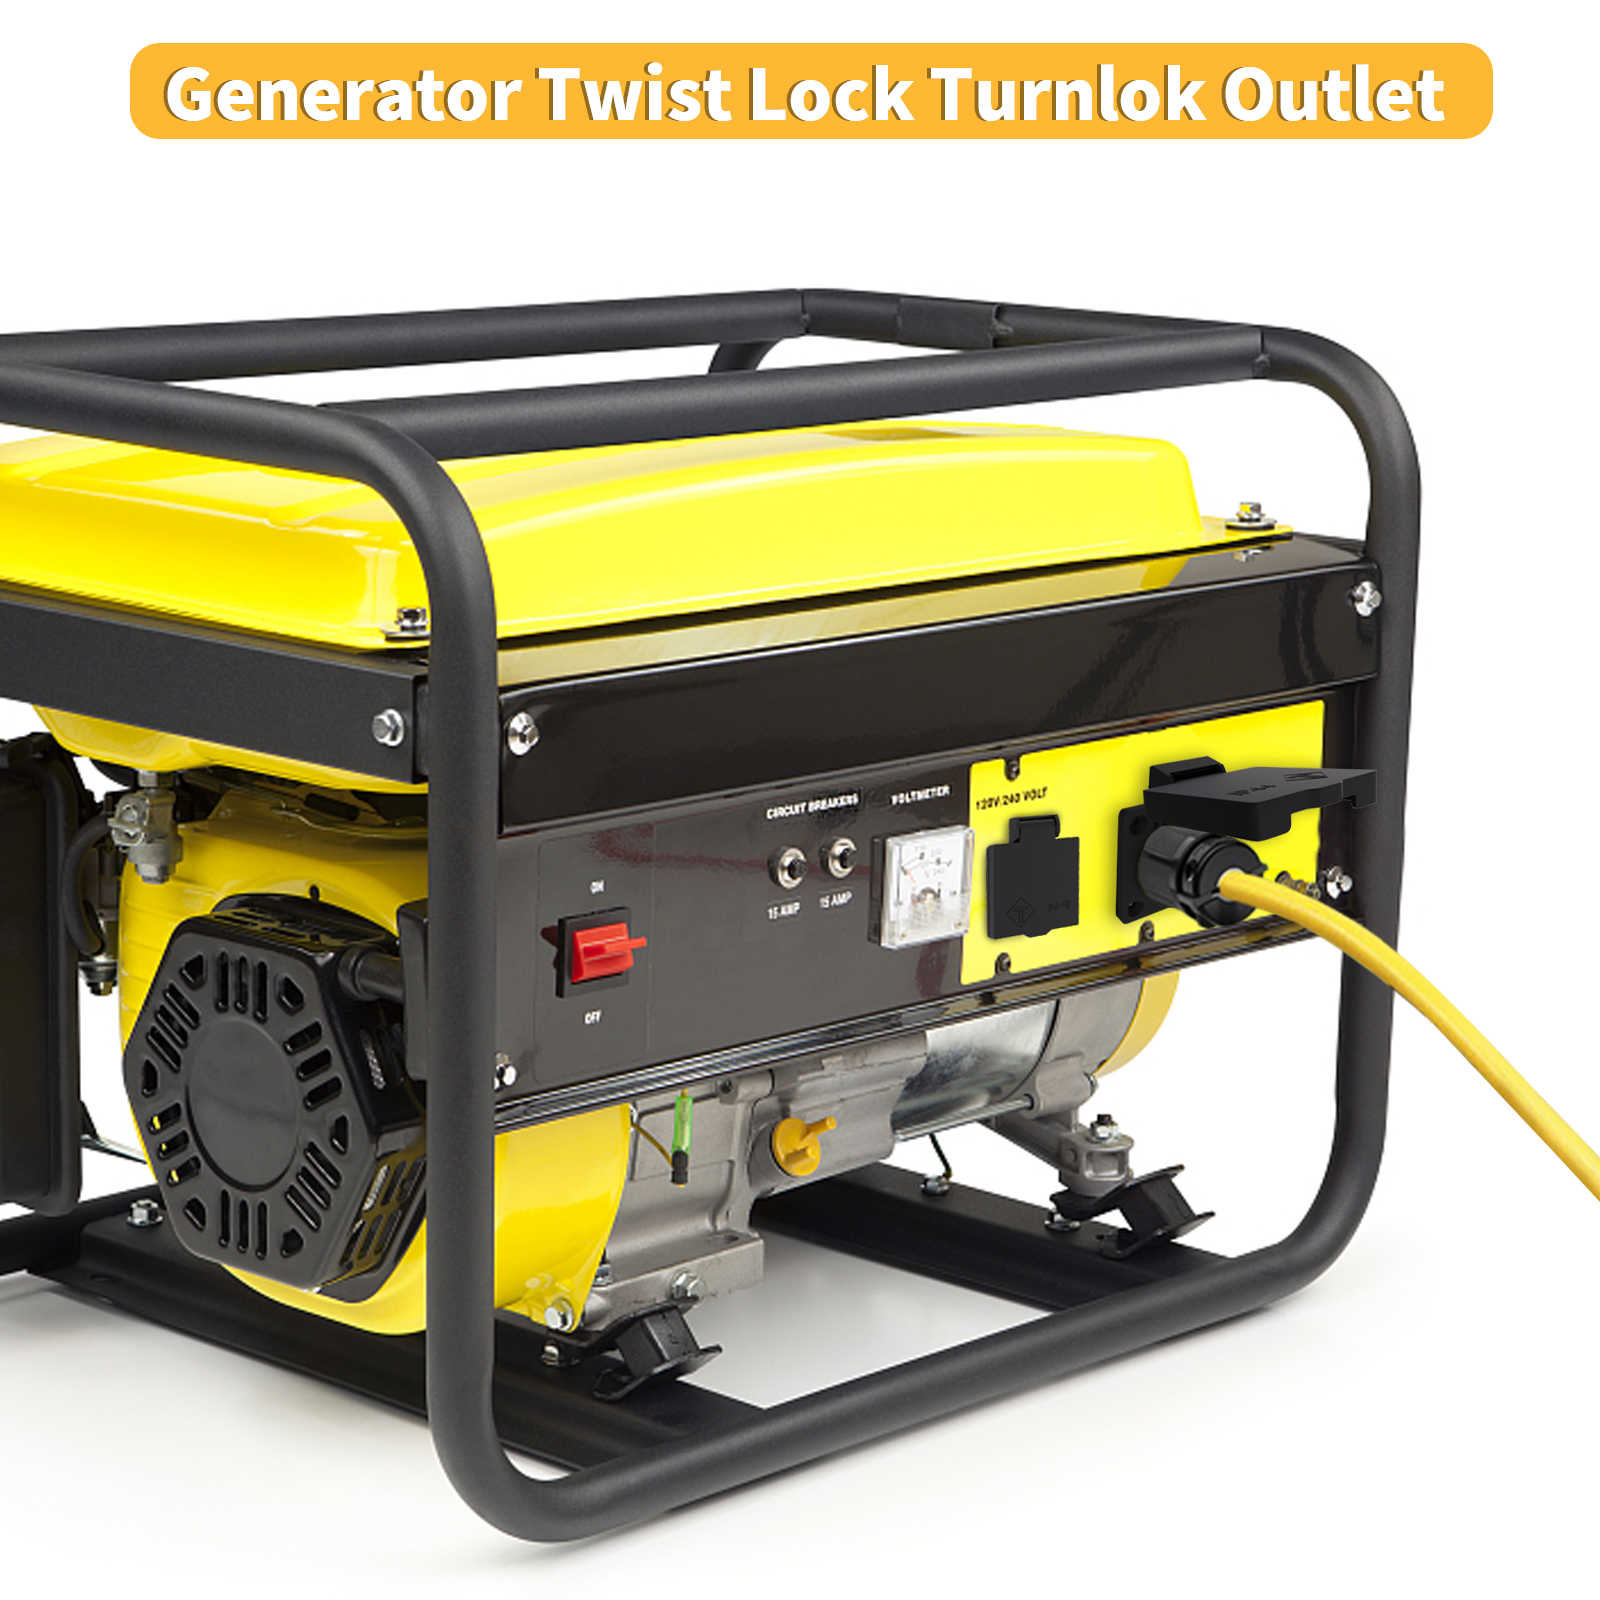 The outlet can be used as generator twist lock turnlok outlet